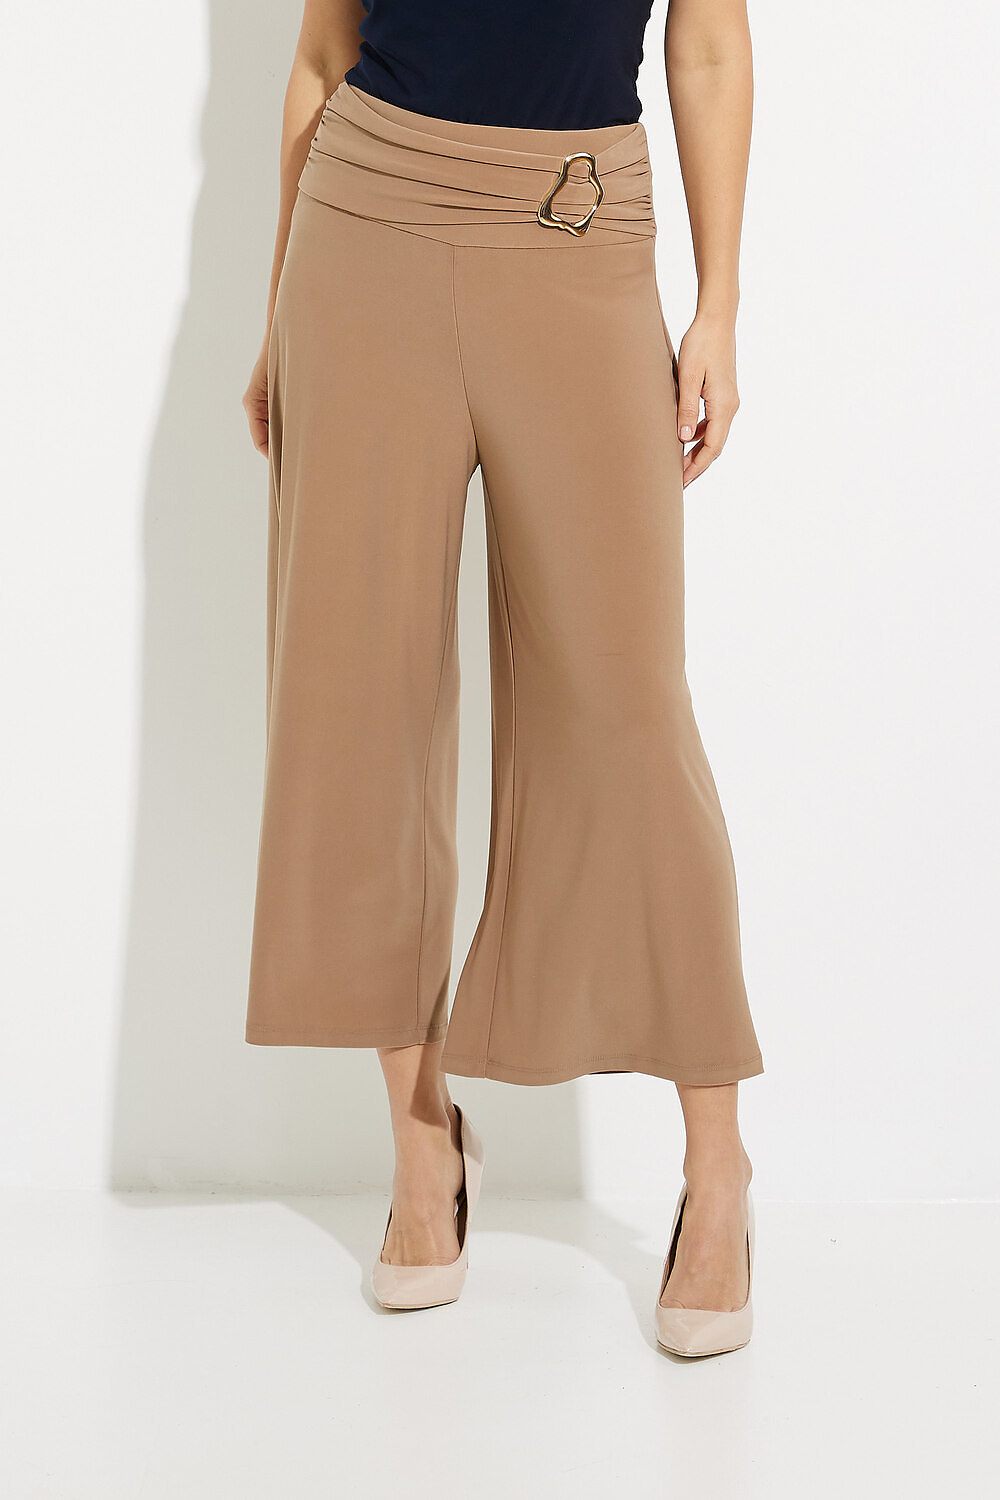 Hardware Accent Wide Leg Pants Style 231251. Tiger`s Eye